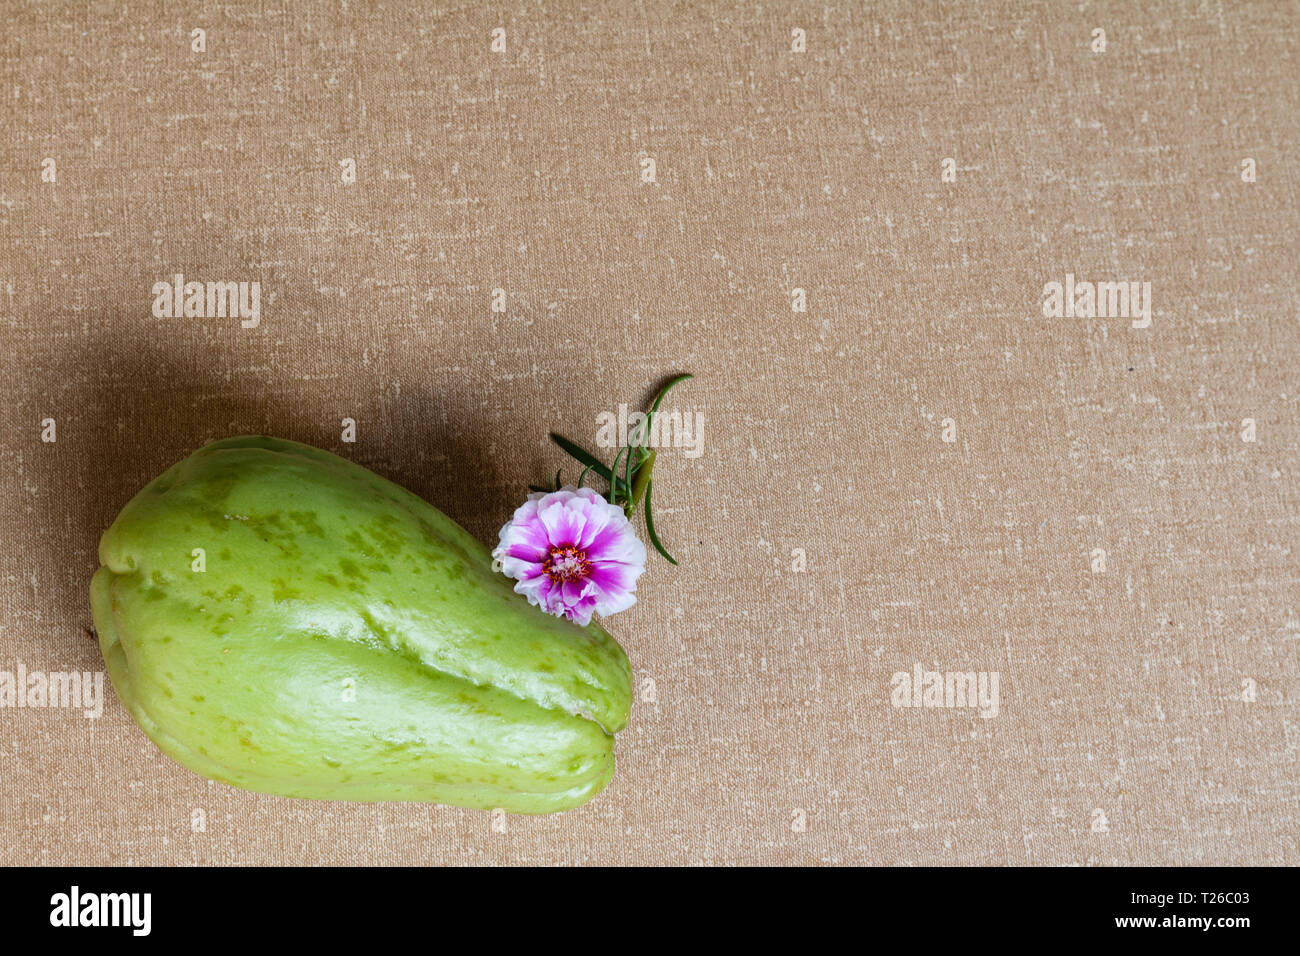 Chayote fruit and small flower with textured backgroud. Stock Photo